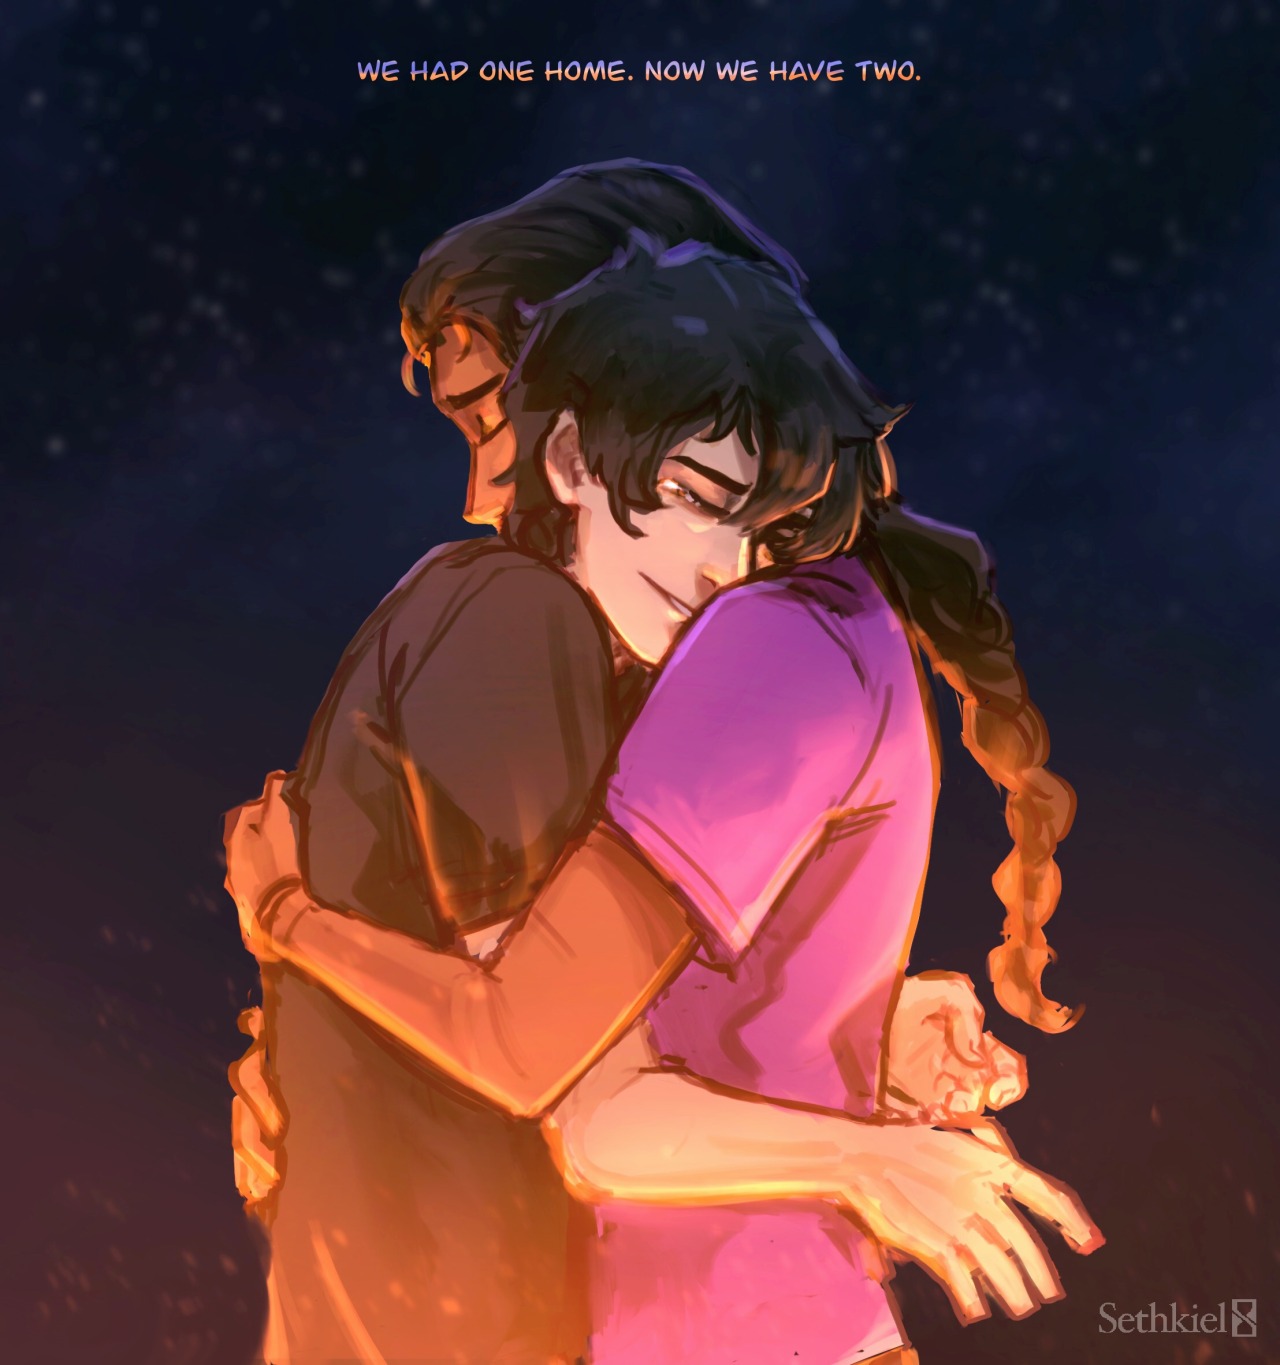 Camp Art Blog — Reyna grabbed Nico's hand and pulled him gently...